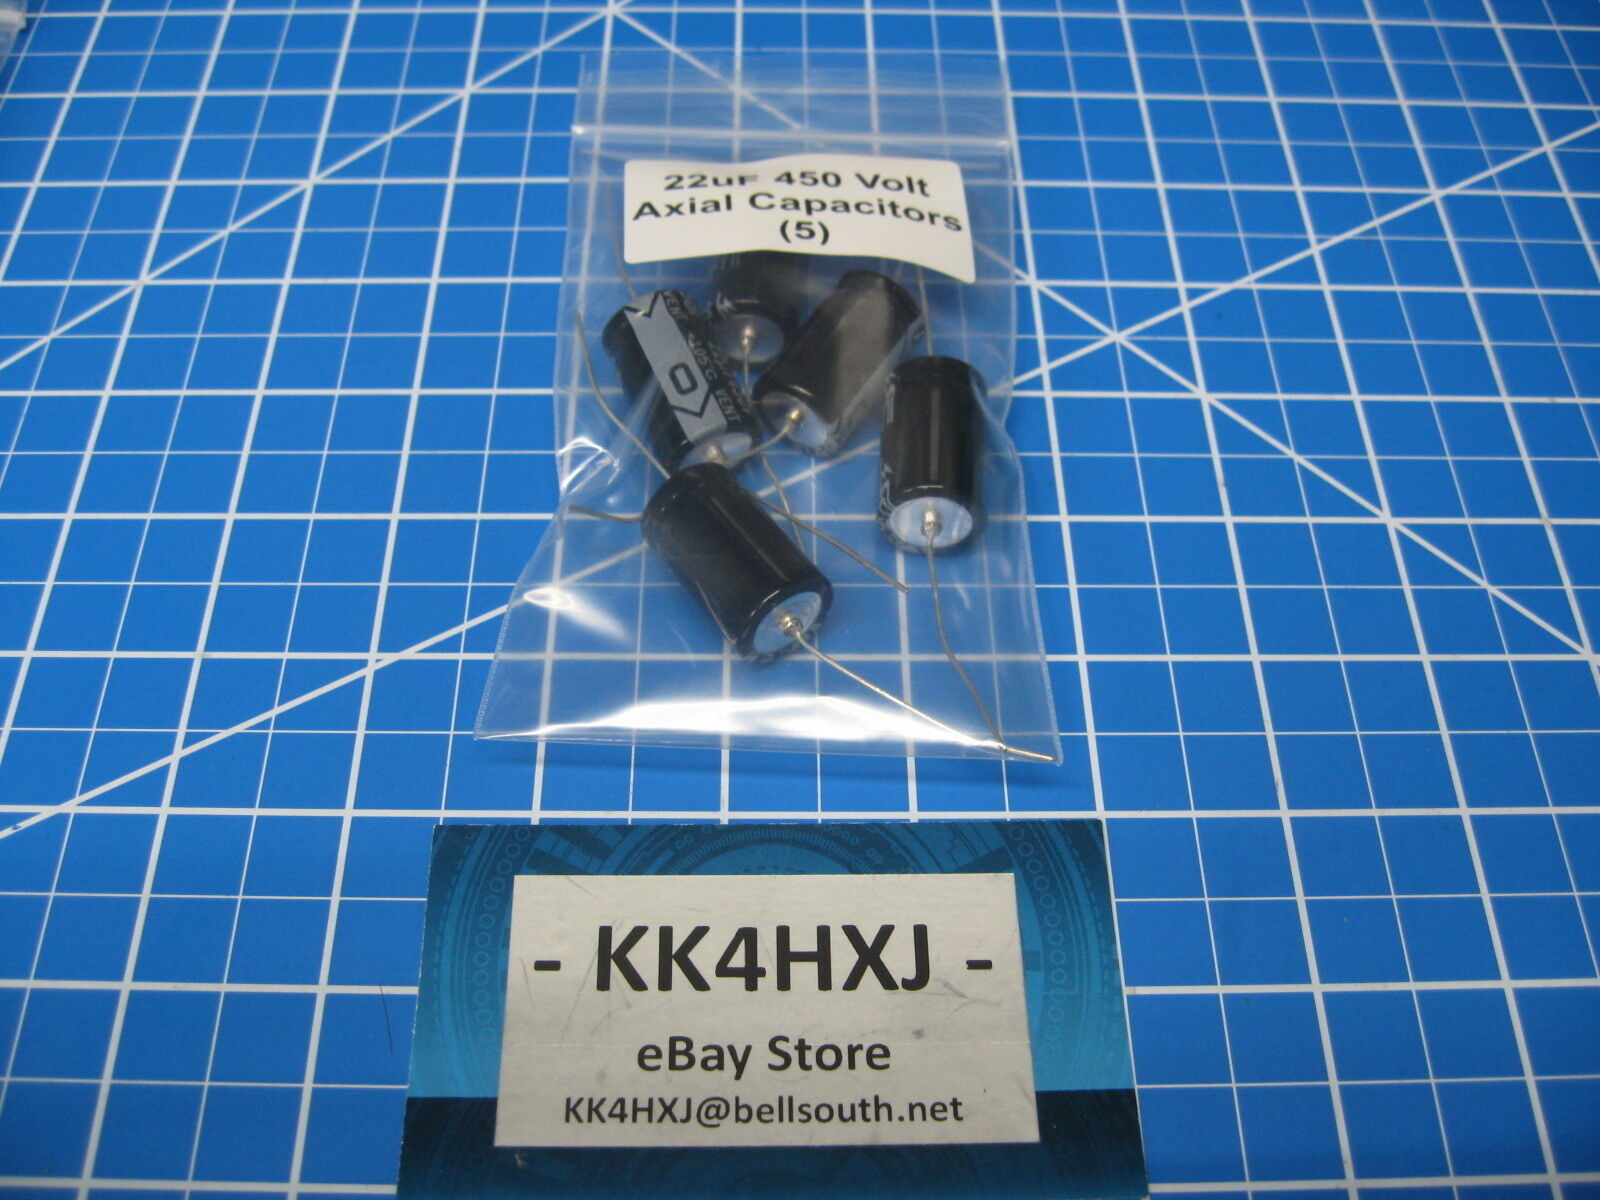 SC - GHA Series Axial New color 450v 22uF 5 Electrolytic Capacitors New life